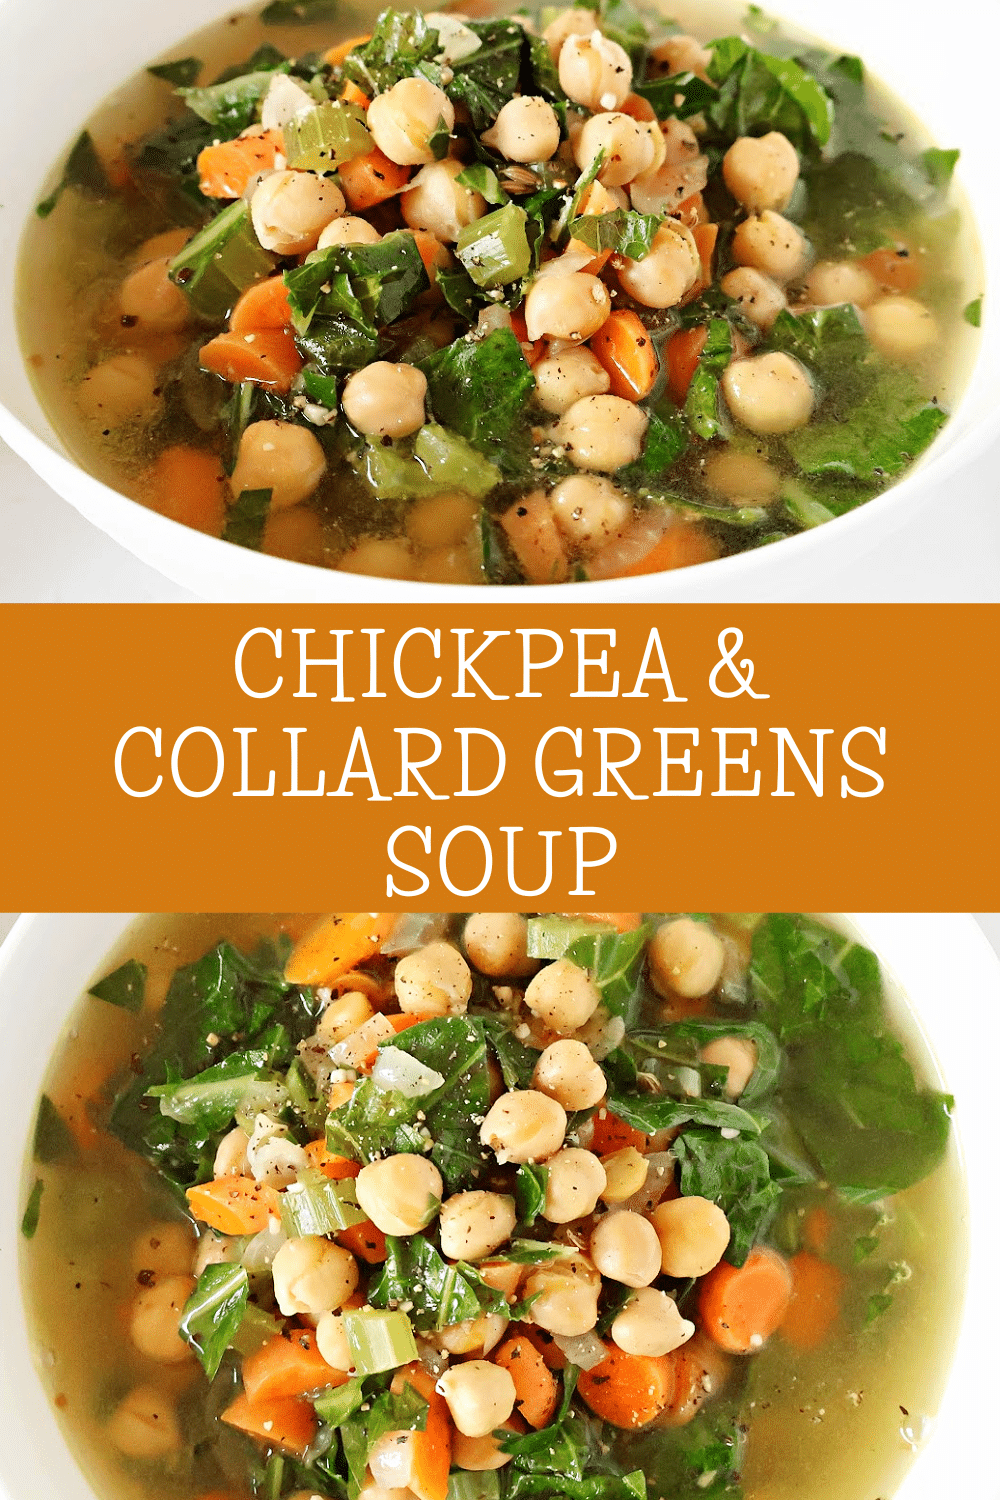 Chickpea and Collard Greens Soup – a quick and flavorful delight featuring tender chickpeas, vibrant collard greens, and aromatic spices in a savory broth. Ready in just 20 minutes, it's a wholesome and time-friendly choice for a delicious and comforting meal. via @thiswifecooks